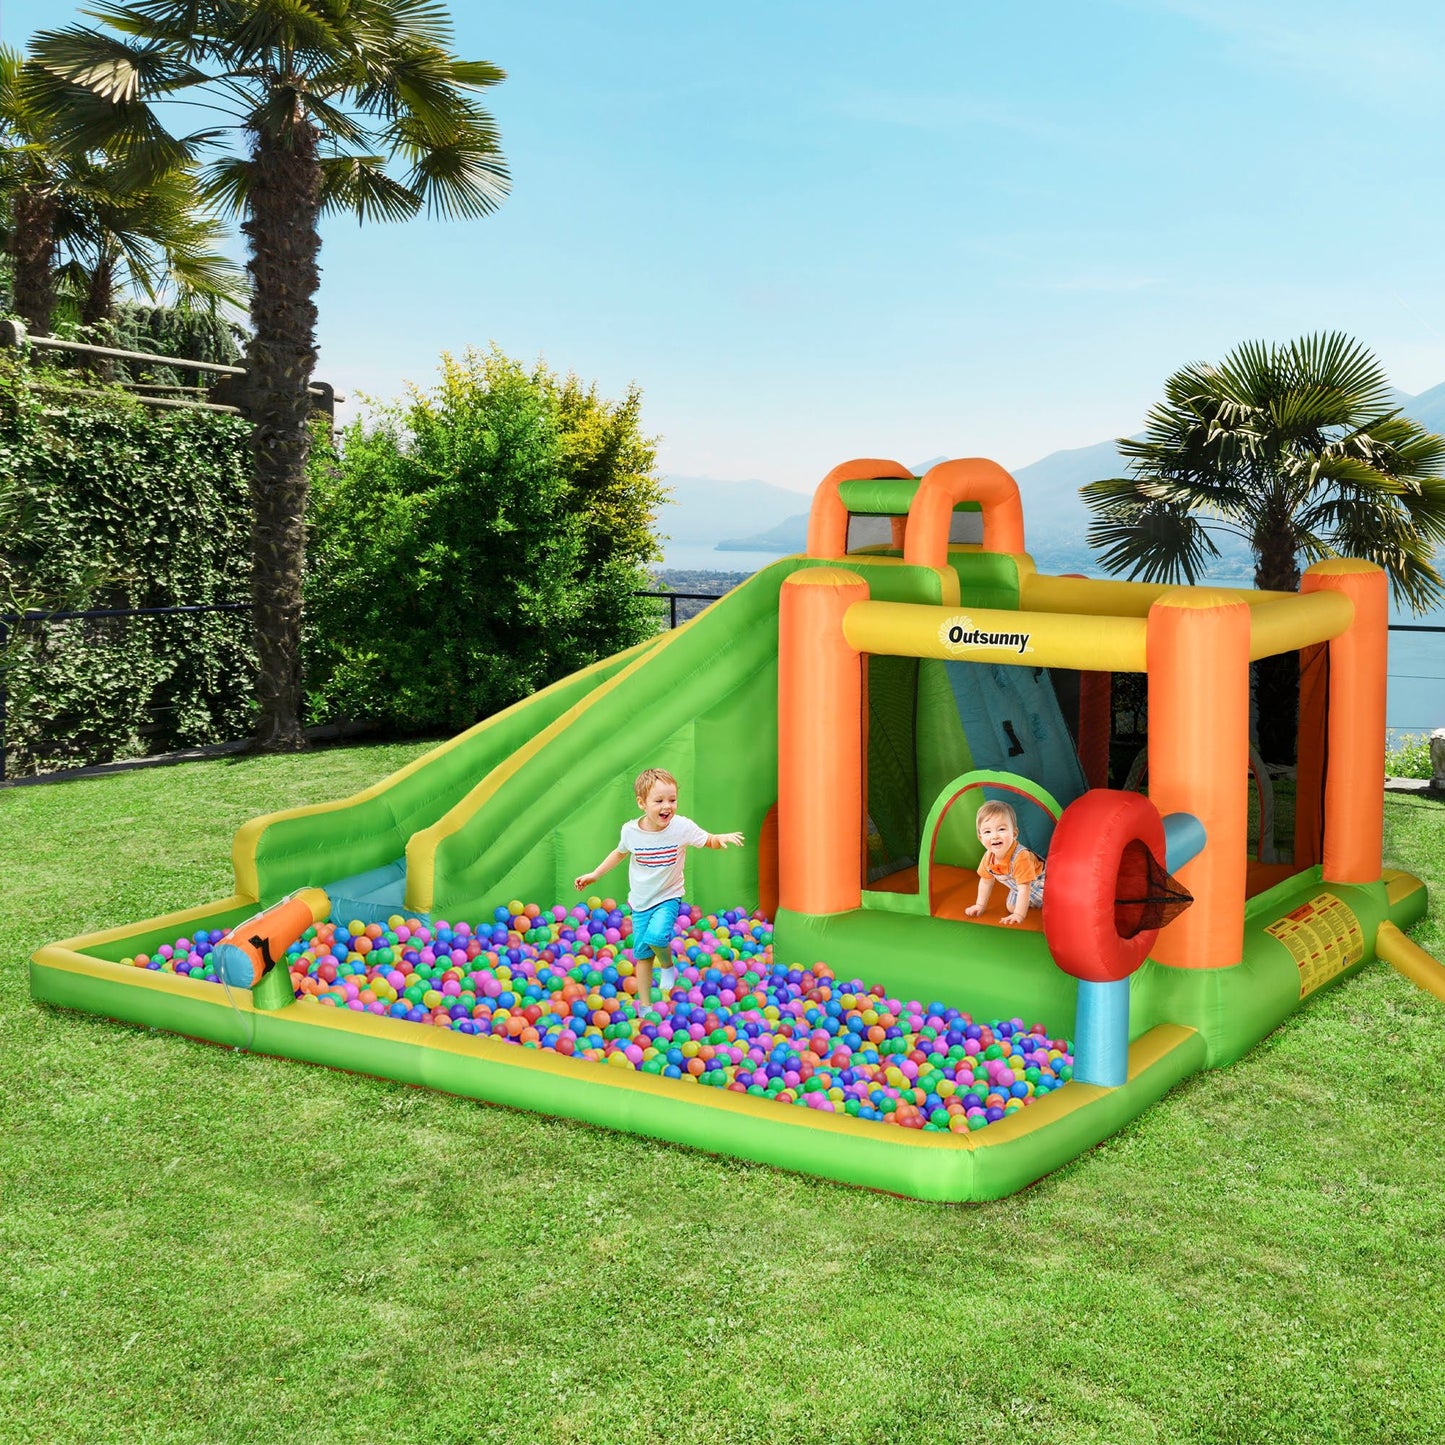 Miscellaneous-7-in-1 Inflatable Water Slide, Kids Castle Bounce House with Slide, trampoline, Pool, Ball-target, Boxing Post, Tunnel Without Air Blower - Outdoor Style Company